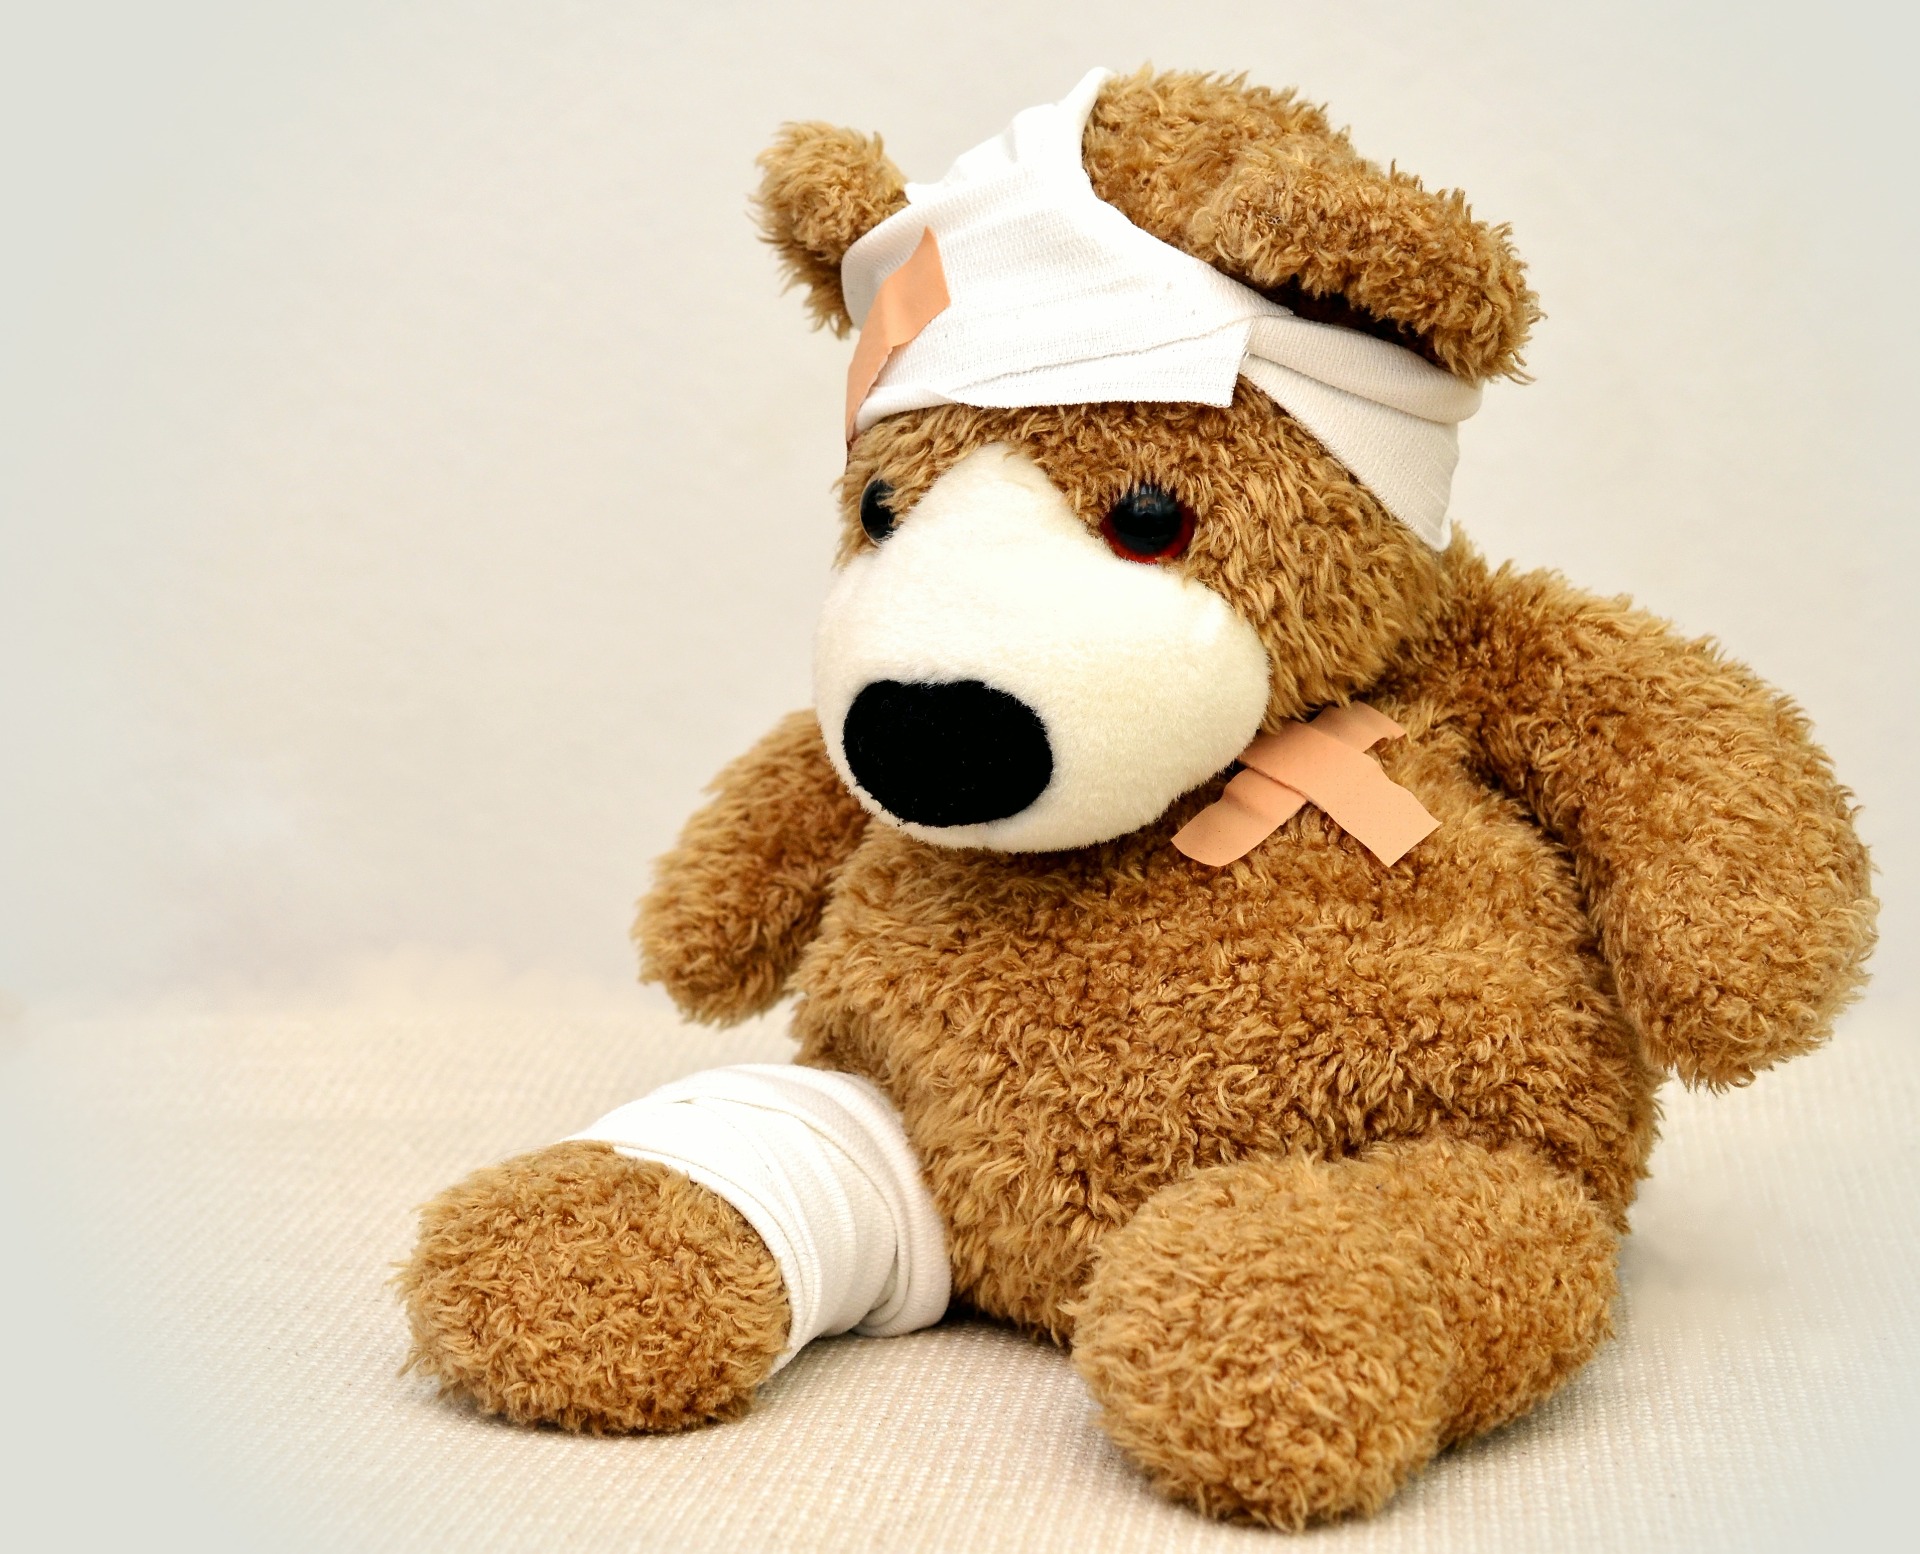 A teddy bear, with a bandage on his leg and head, and a plaster on his torso.